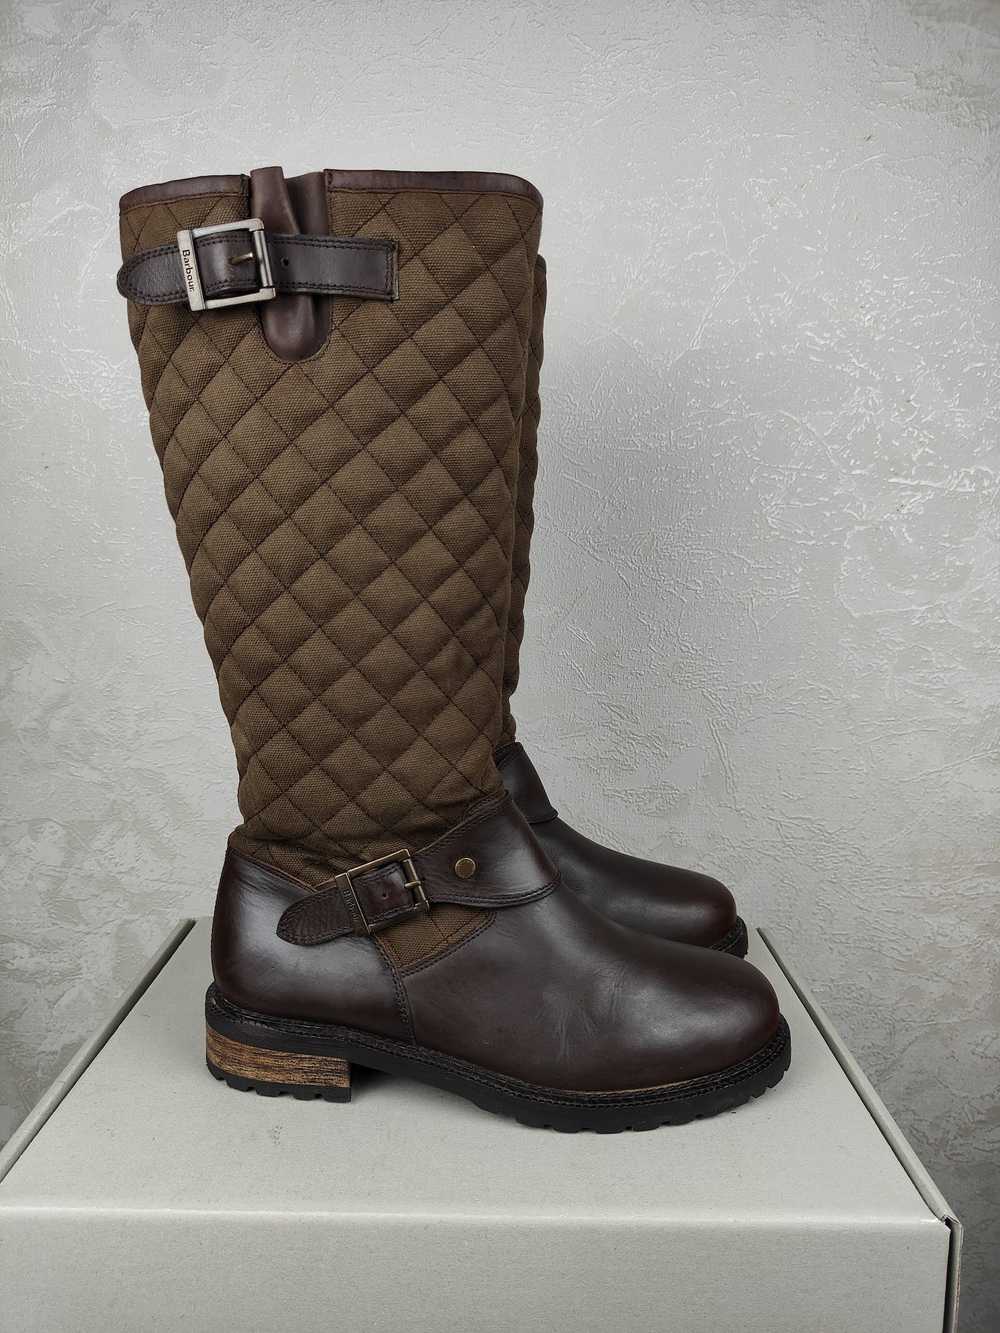 Barbour Barbour International Quilted Boots - image 3